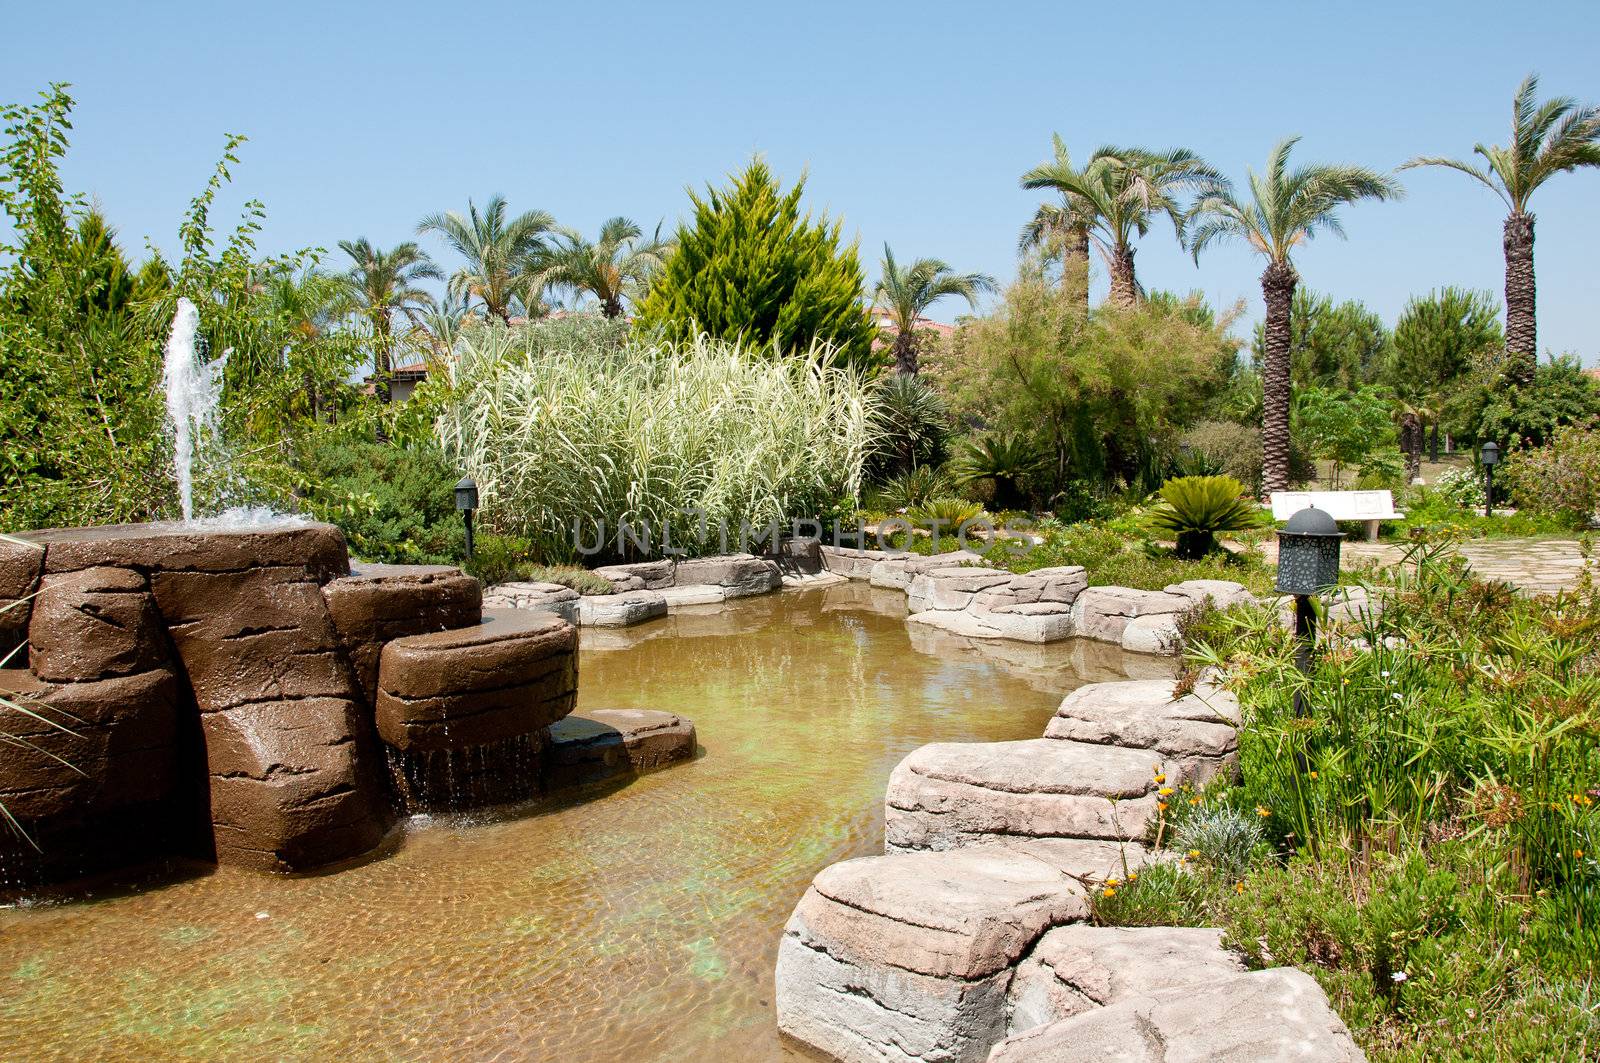 Landscaping - a stone fountain and pond